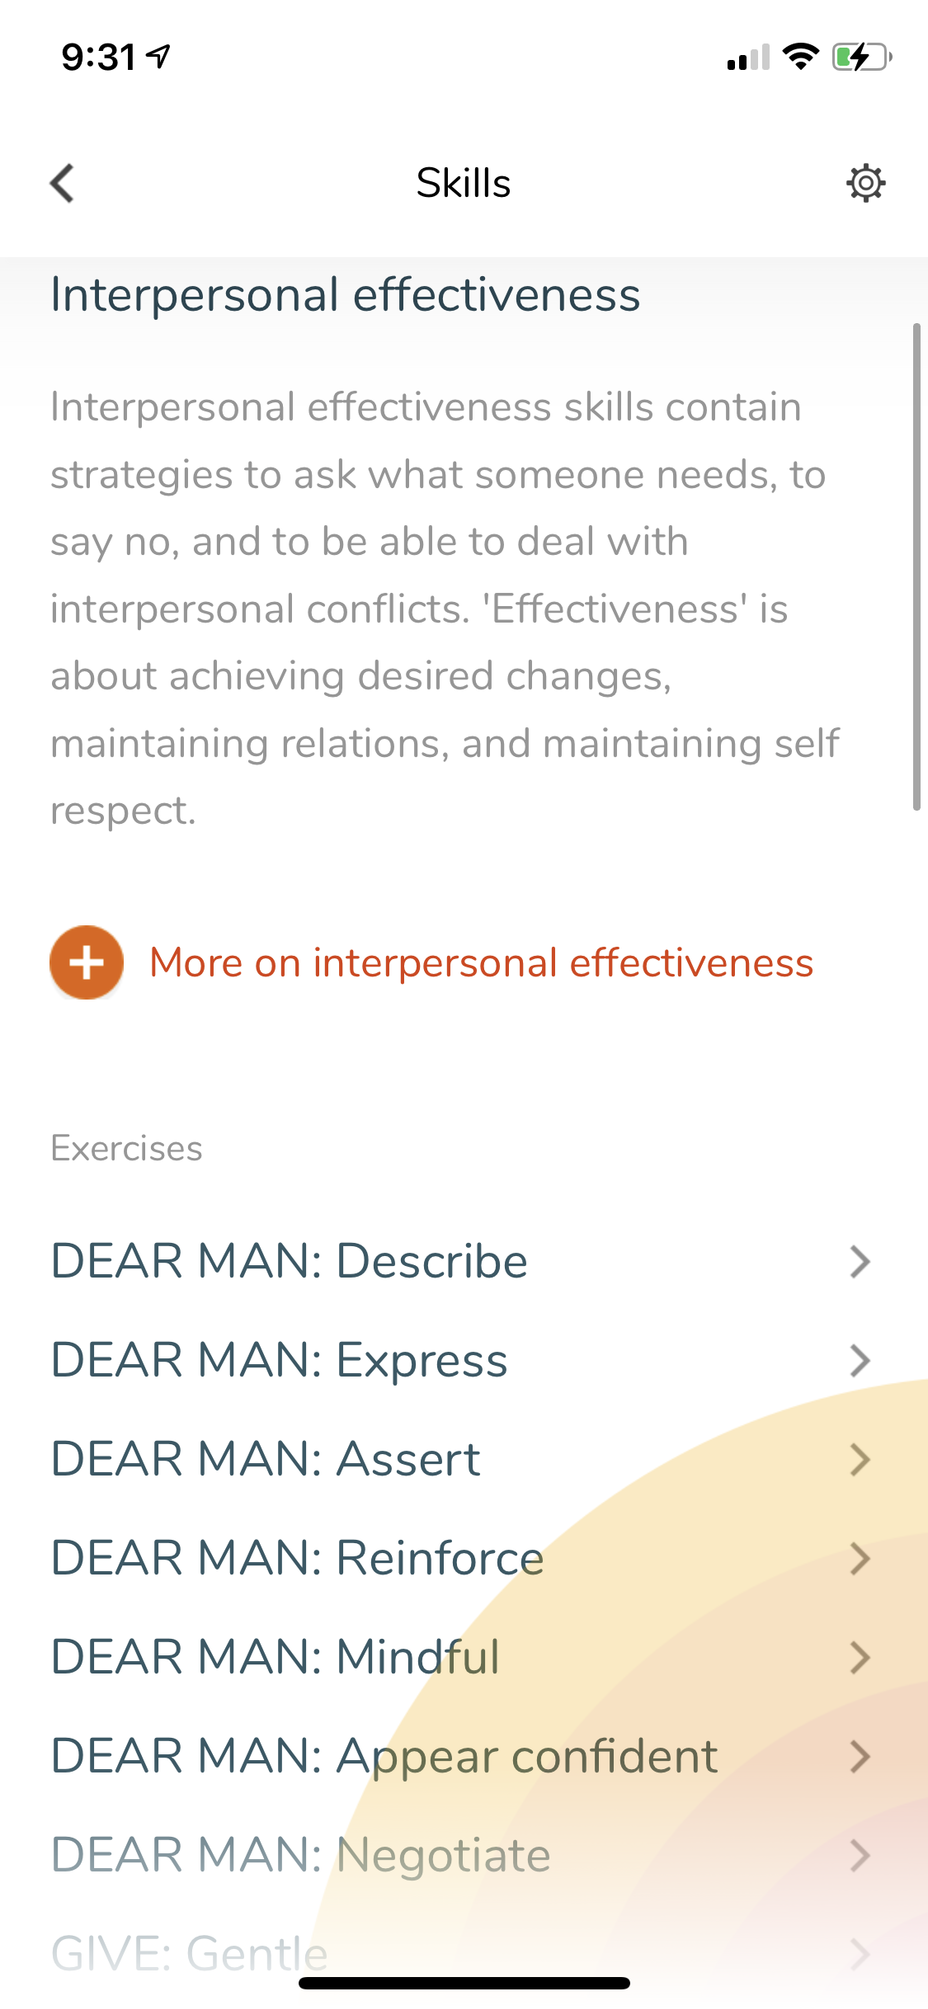 <p>Conflict with Others? Try, Interpersonal Effectiveness</p>